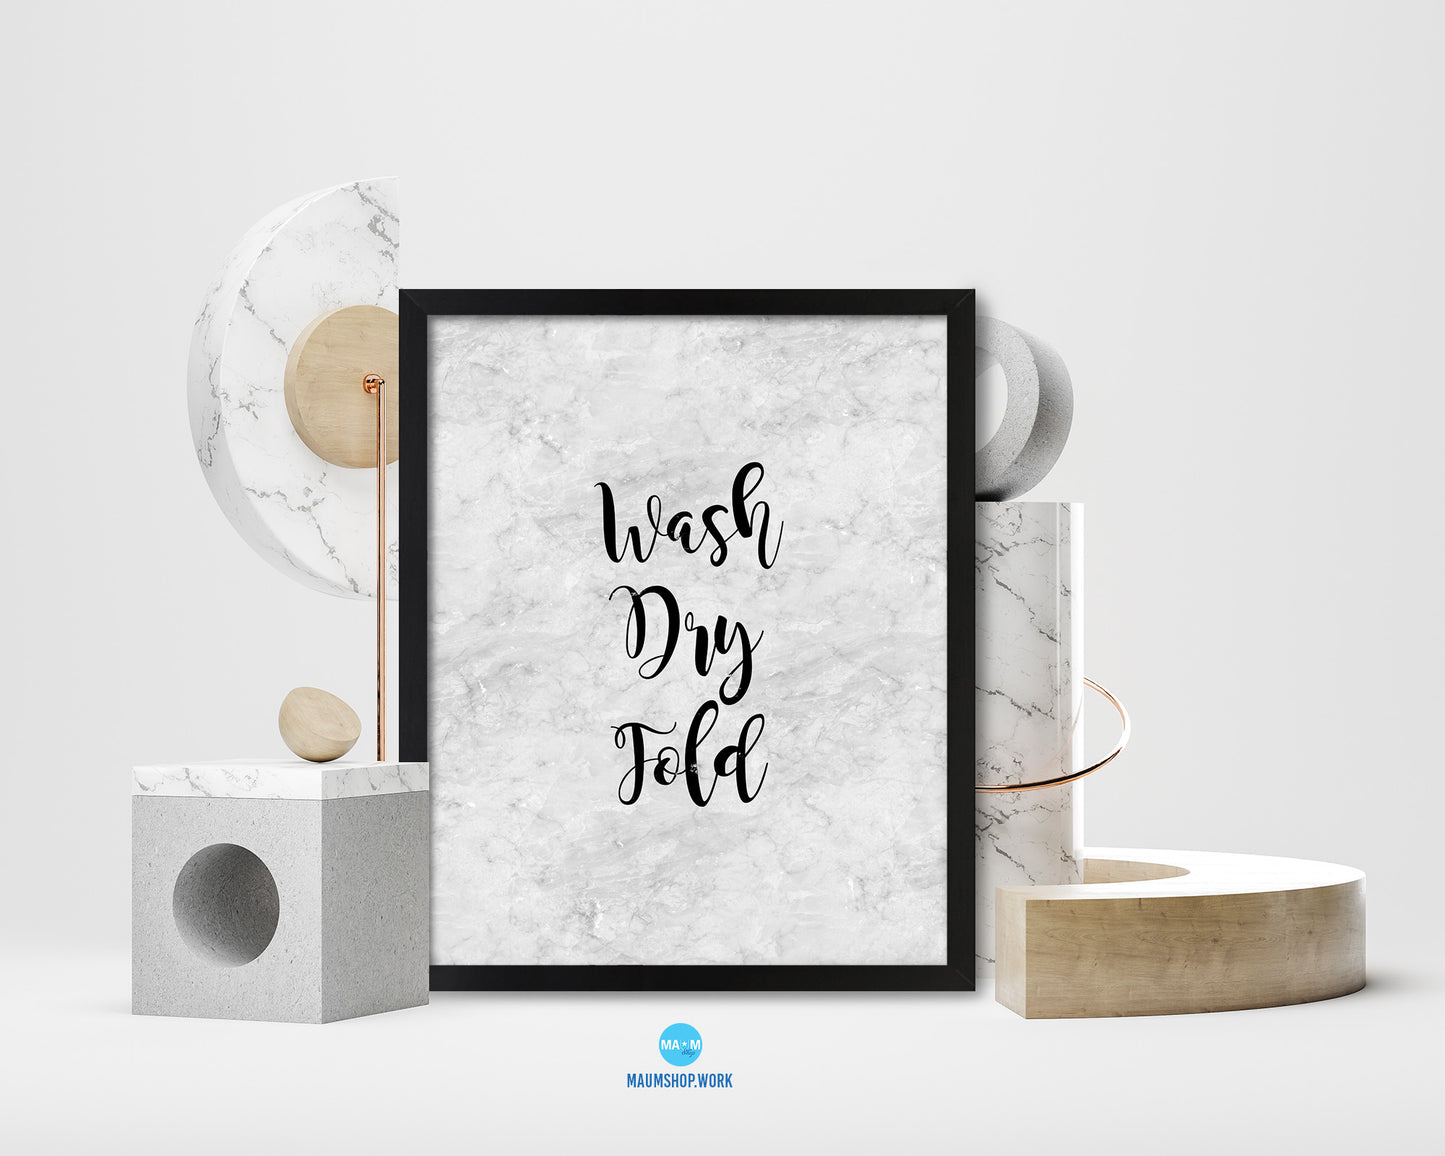 Wash Dry Fold Quote Framed Print Wall Art Decor Gifts